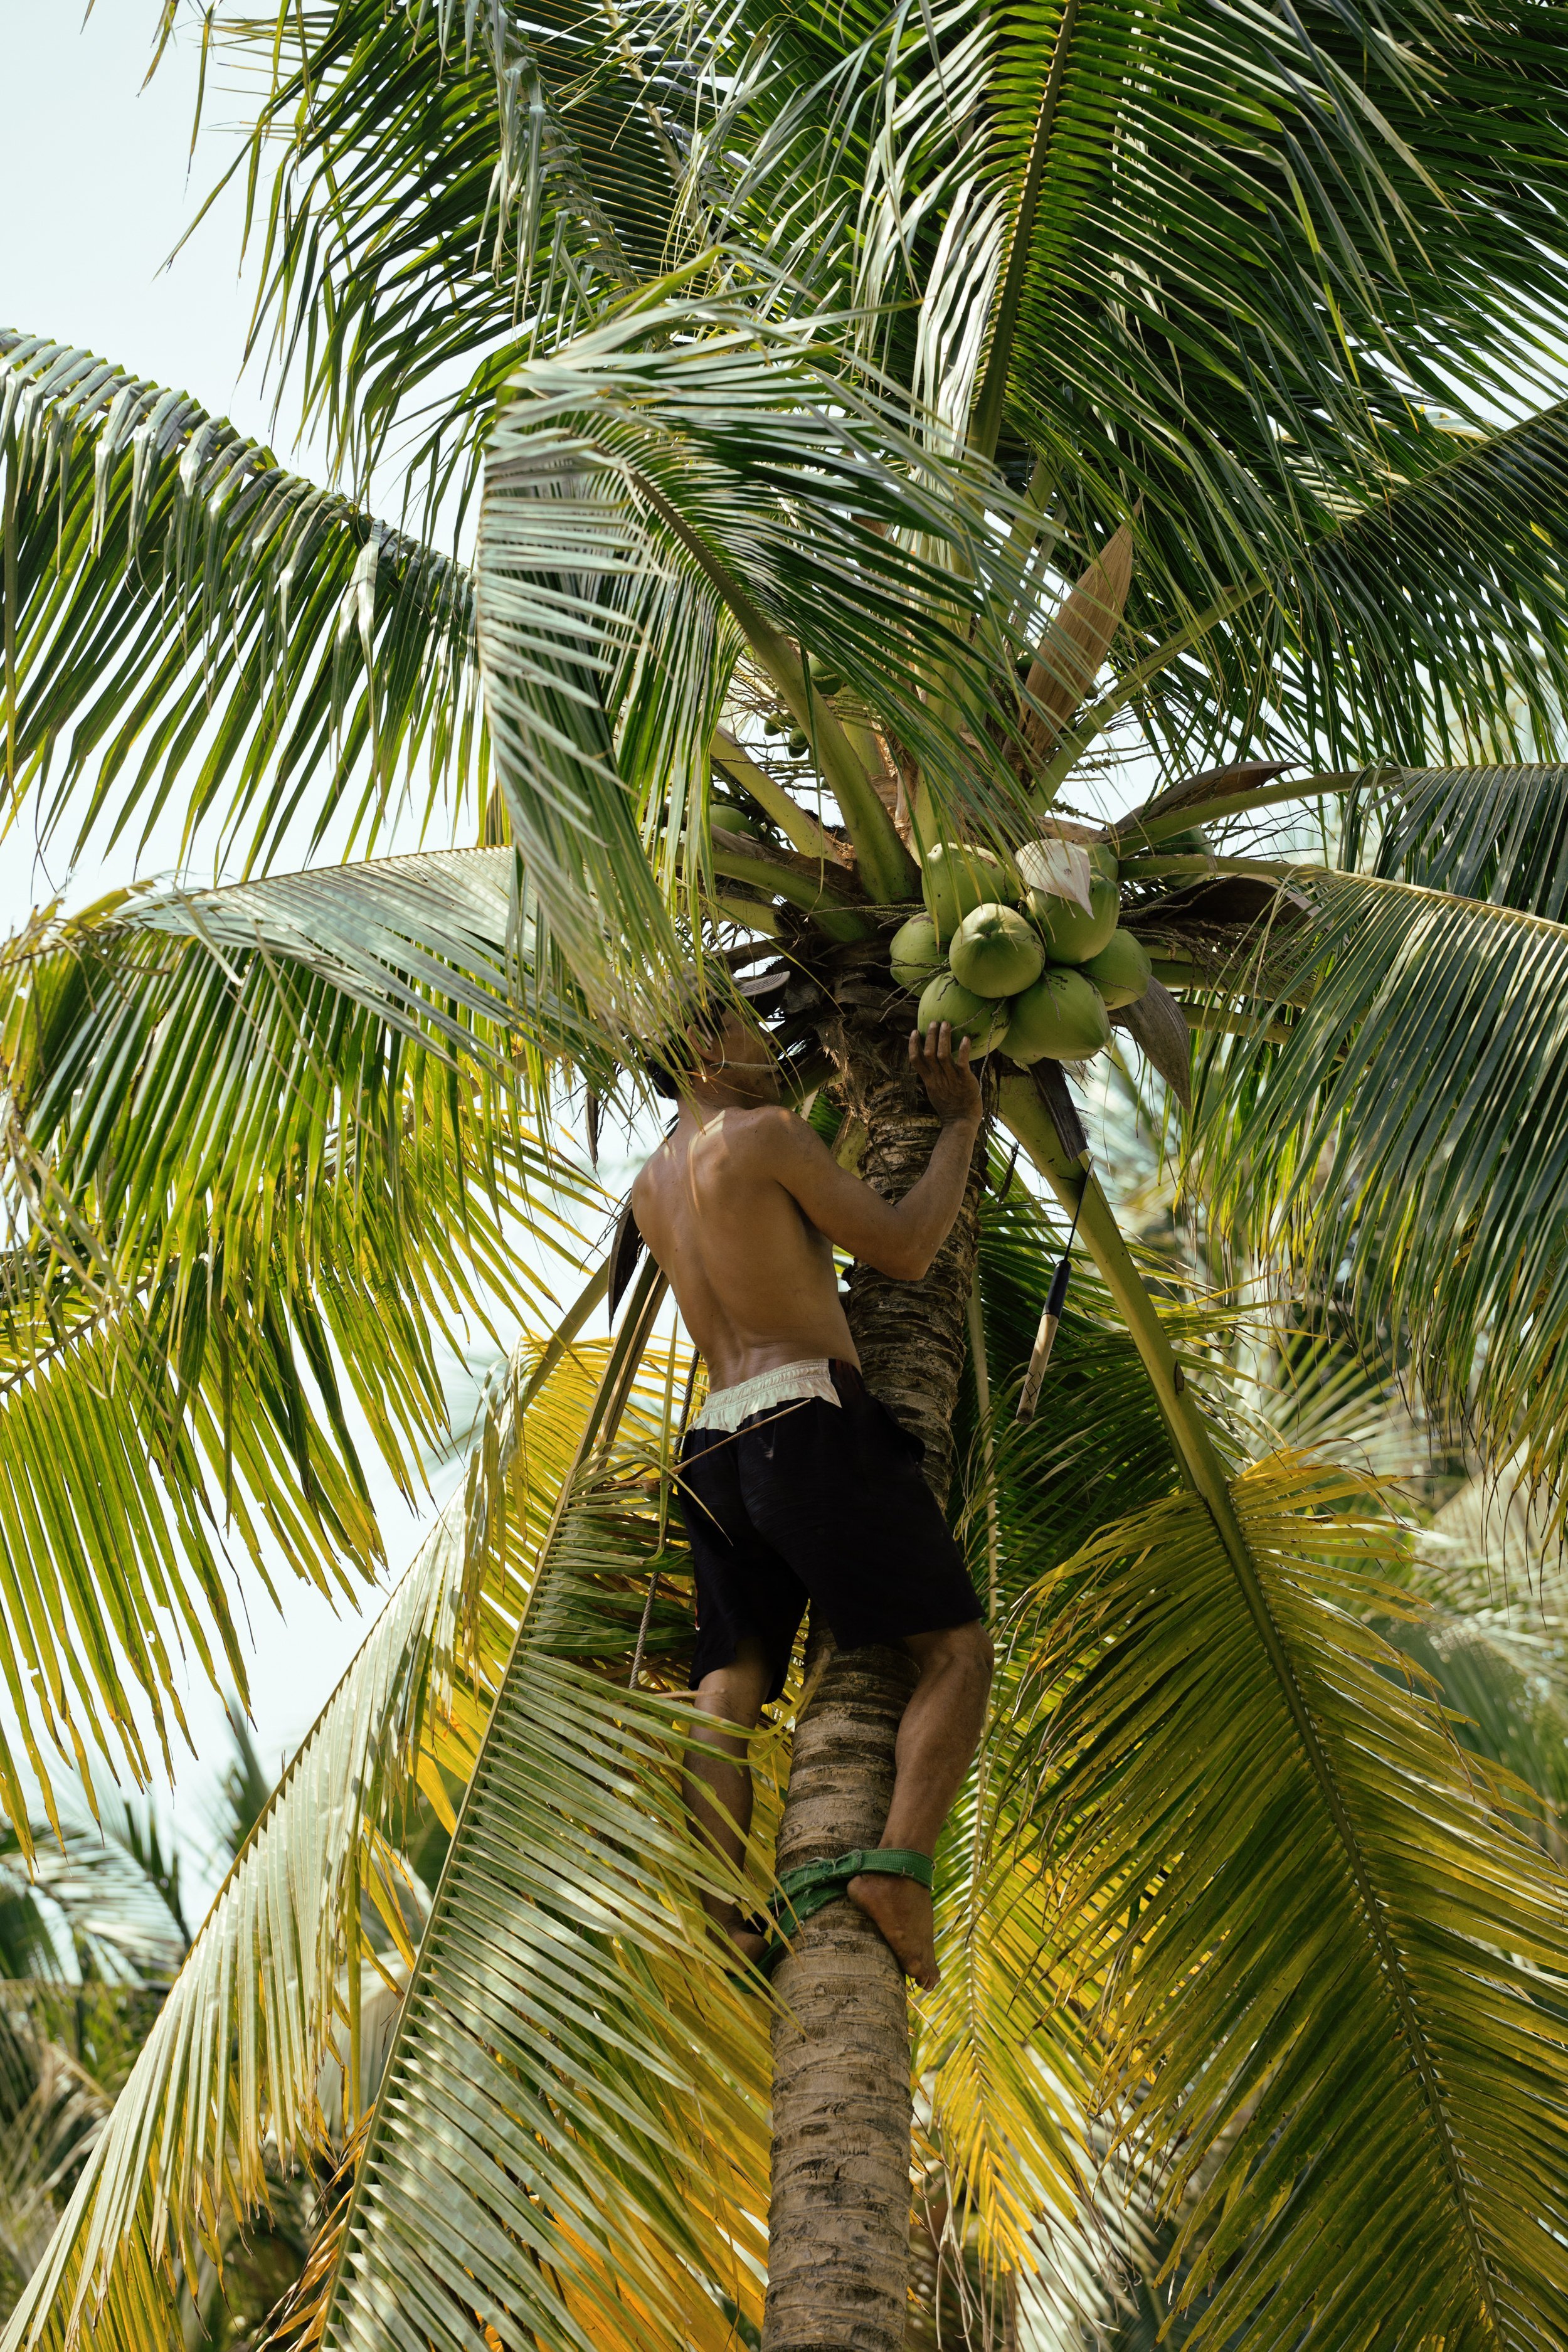 A man picking coconuts from a tree. | Source: Shutterstock.